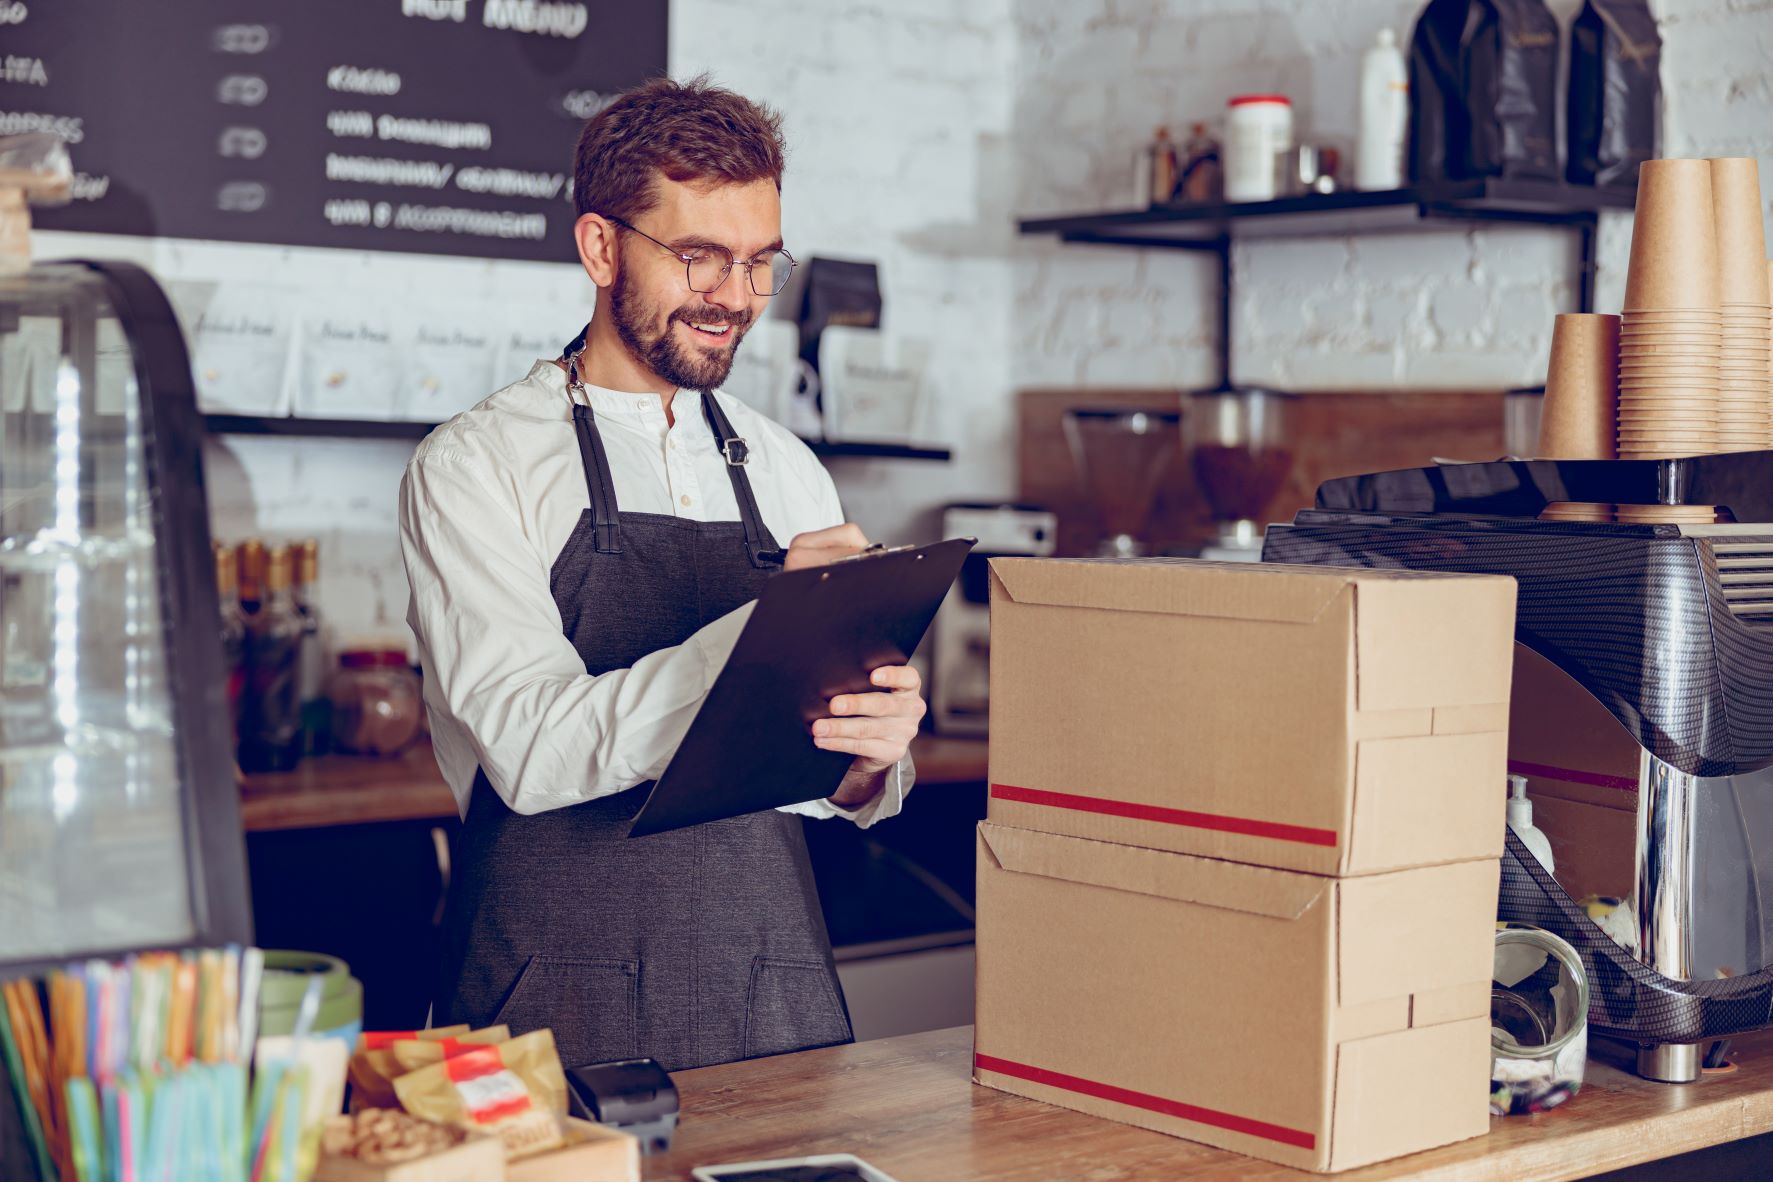 How To Use A Process To Increase Efficiency in Your Restaurant